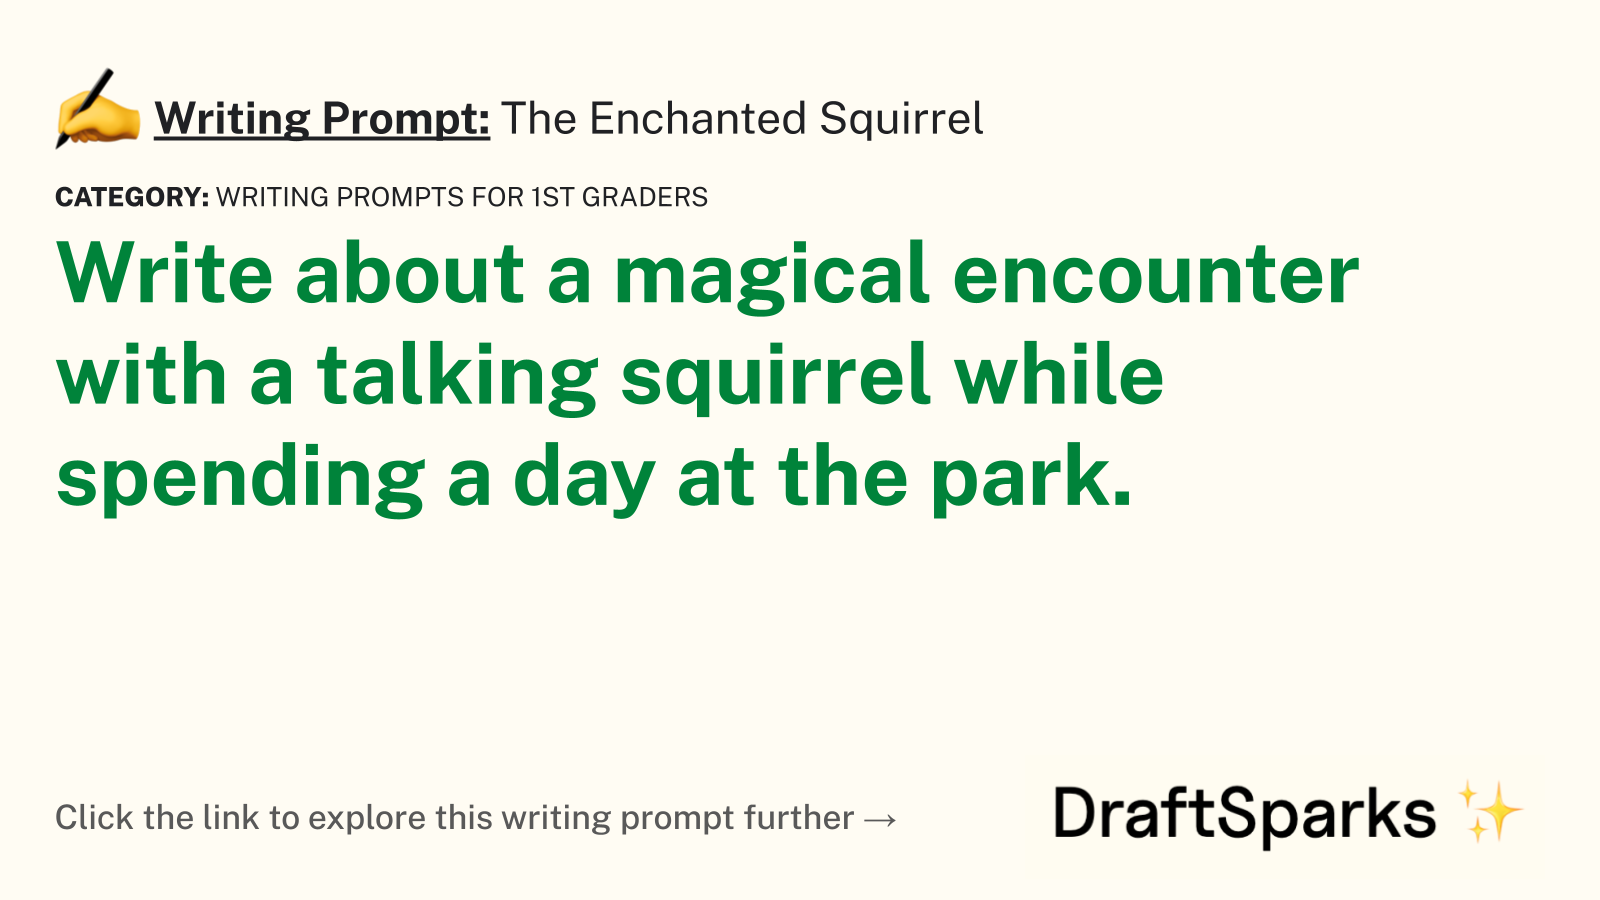 The Enchanted Squirrel